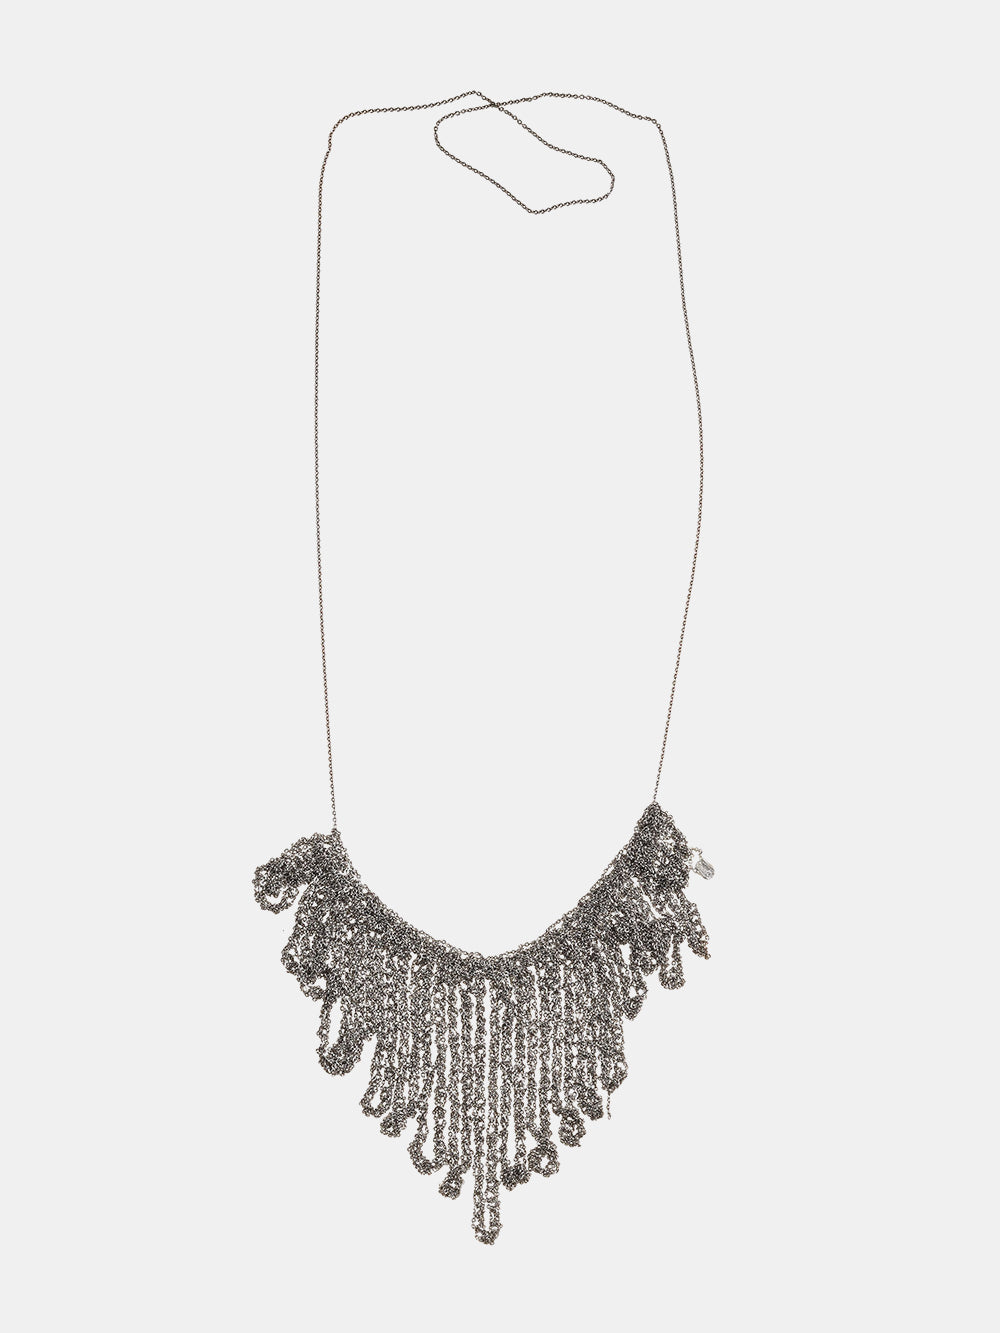 Arielle de Pinto String Fringe Necklace in Champagne